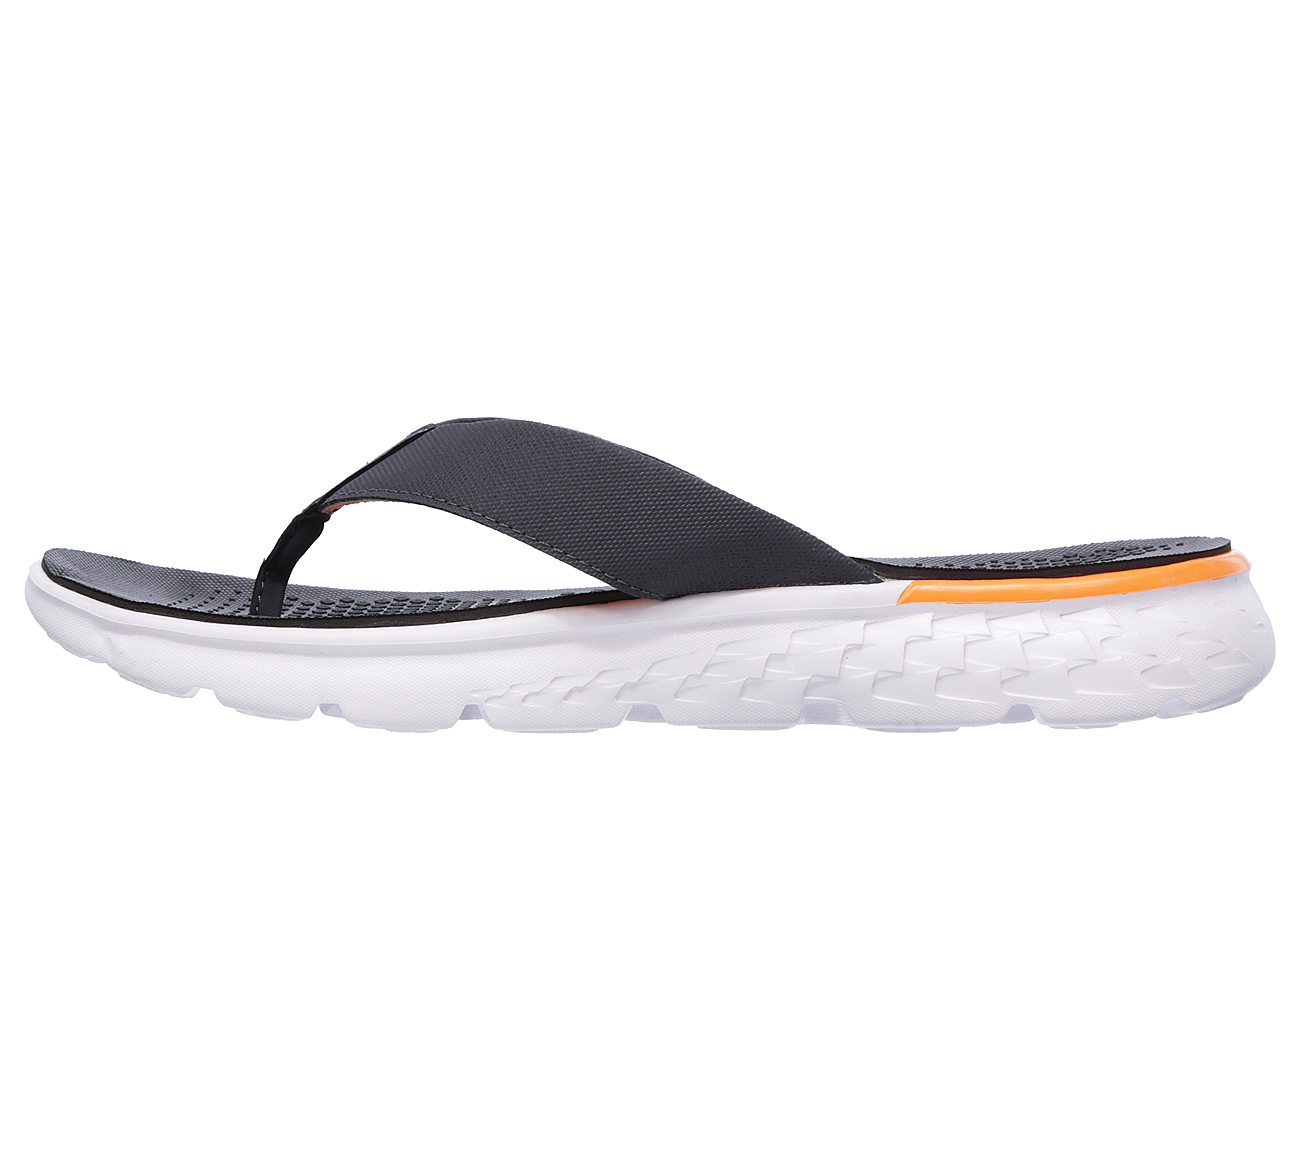 ON-THE-GO 400 - SHORE, CHARCOAL/ORANGE Footwear Left View